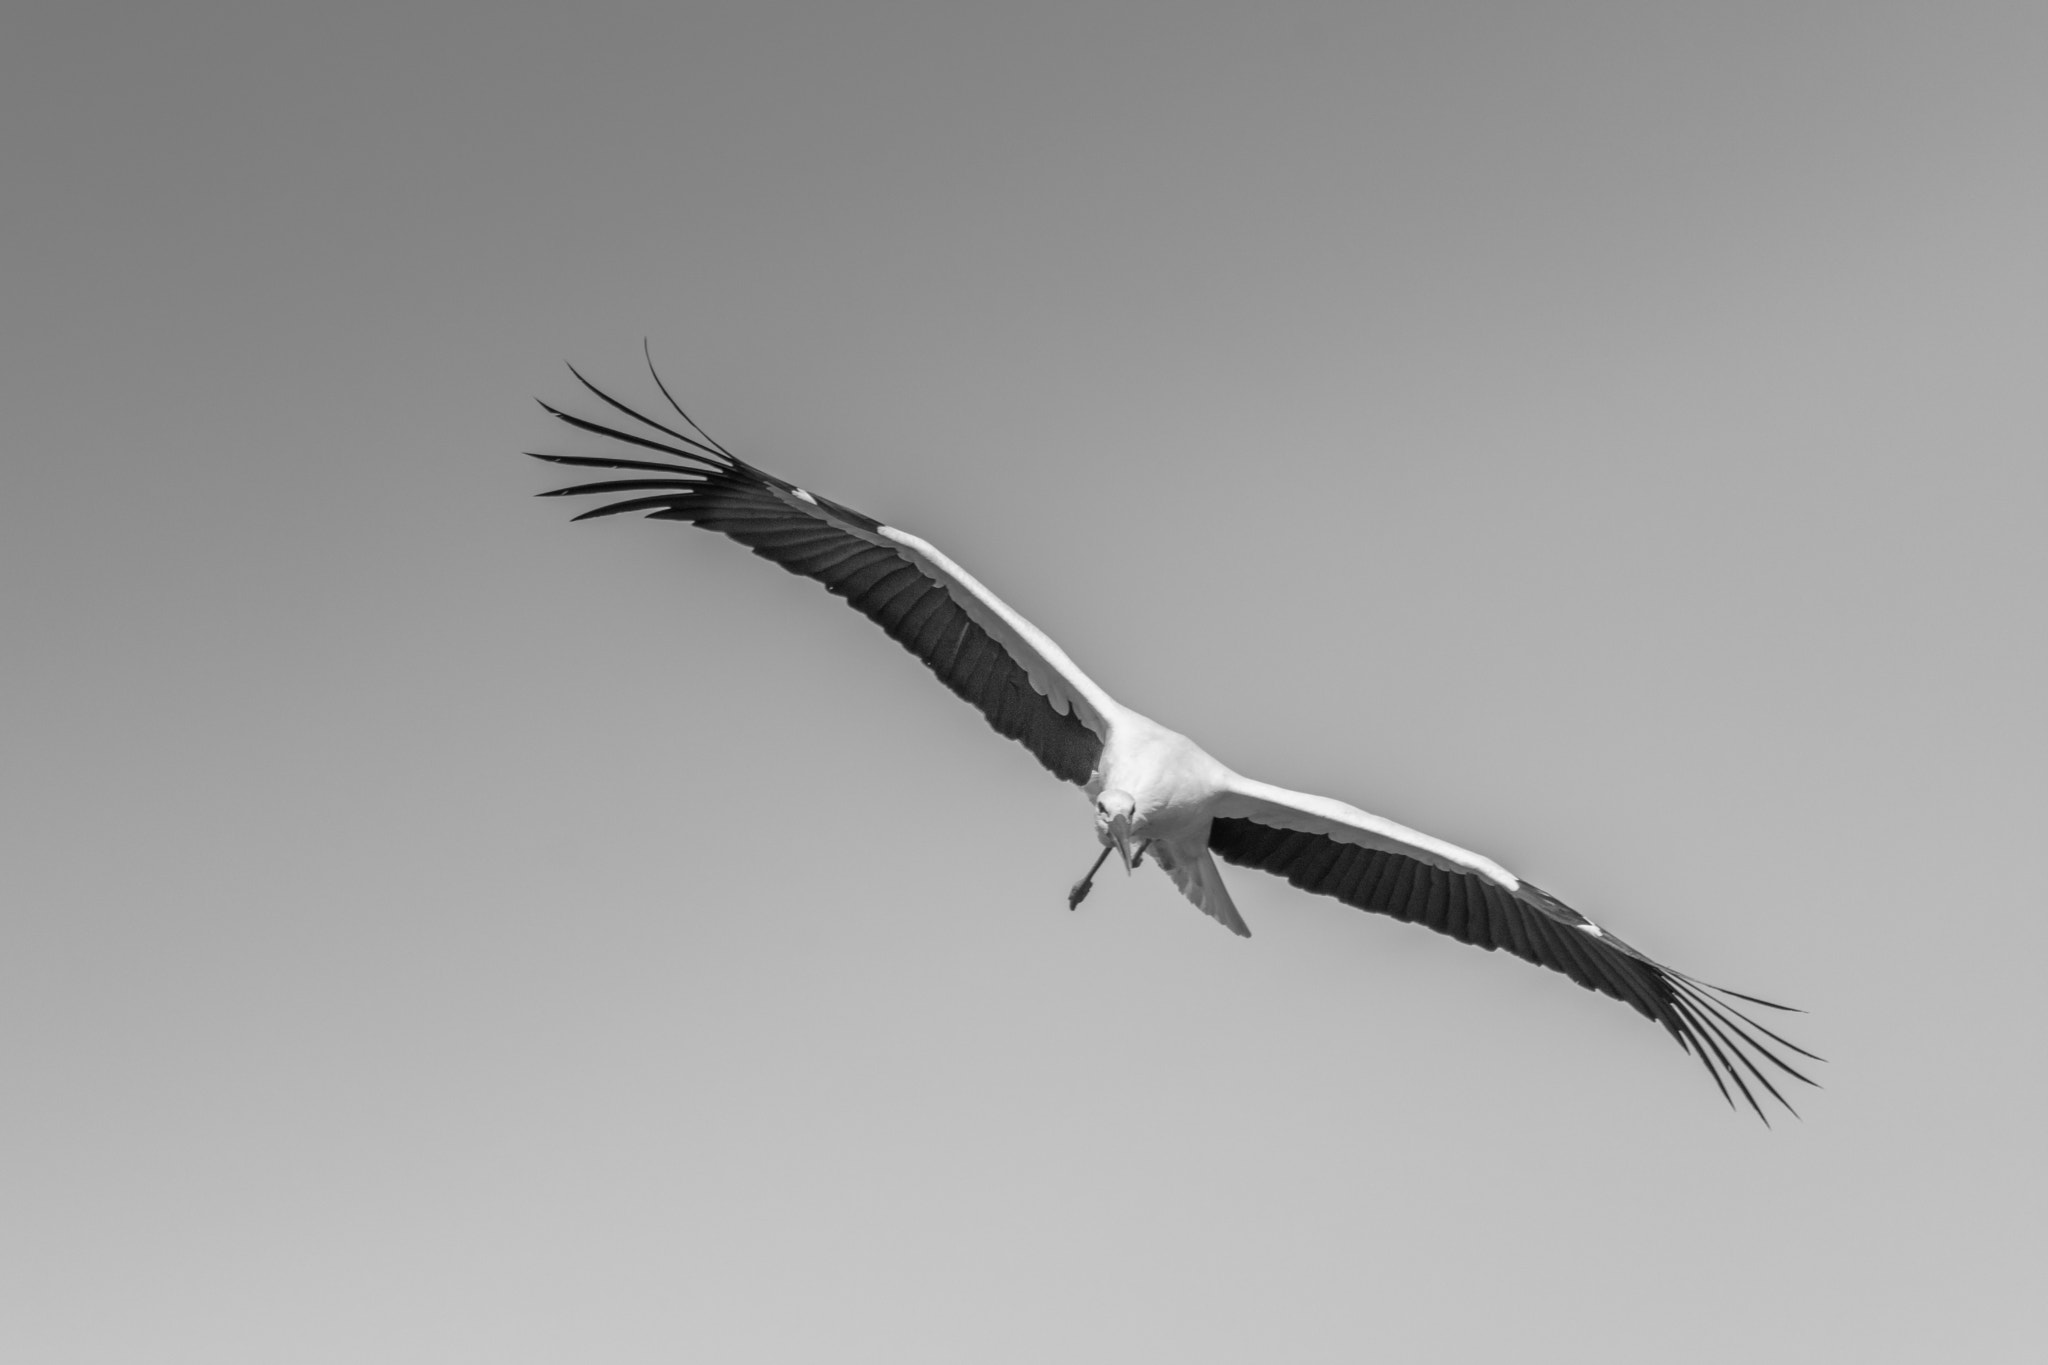 Nikon D7200 + Sigma 150-600mm F5-6.3 DG OS HSM | C sample photo. Stork in the air photography